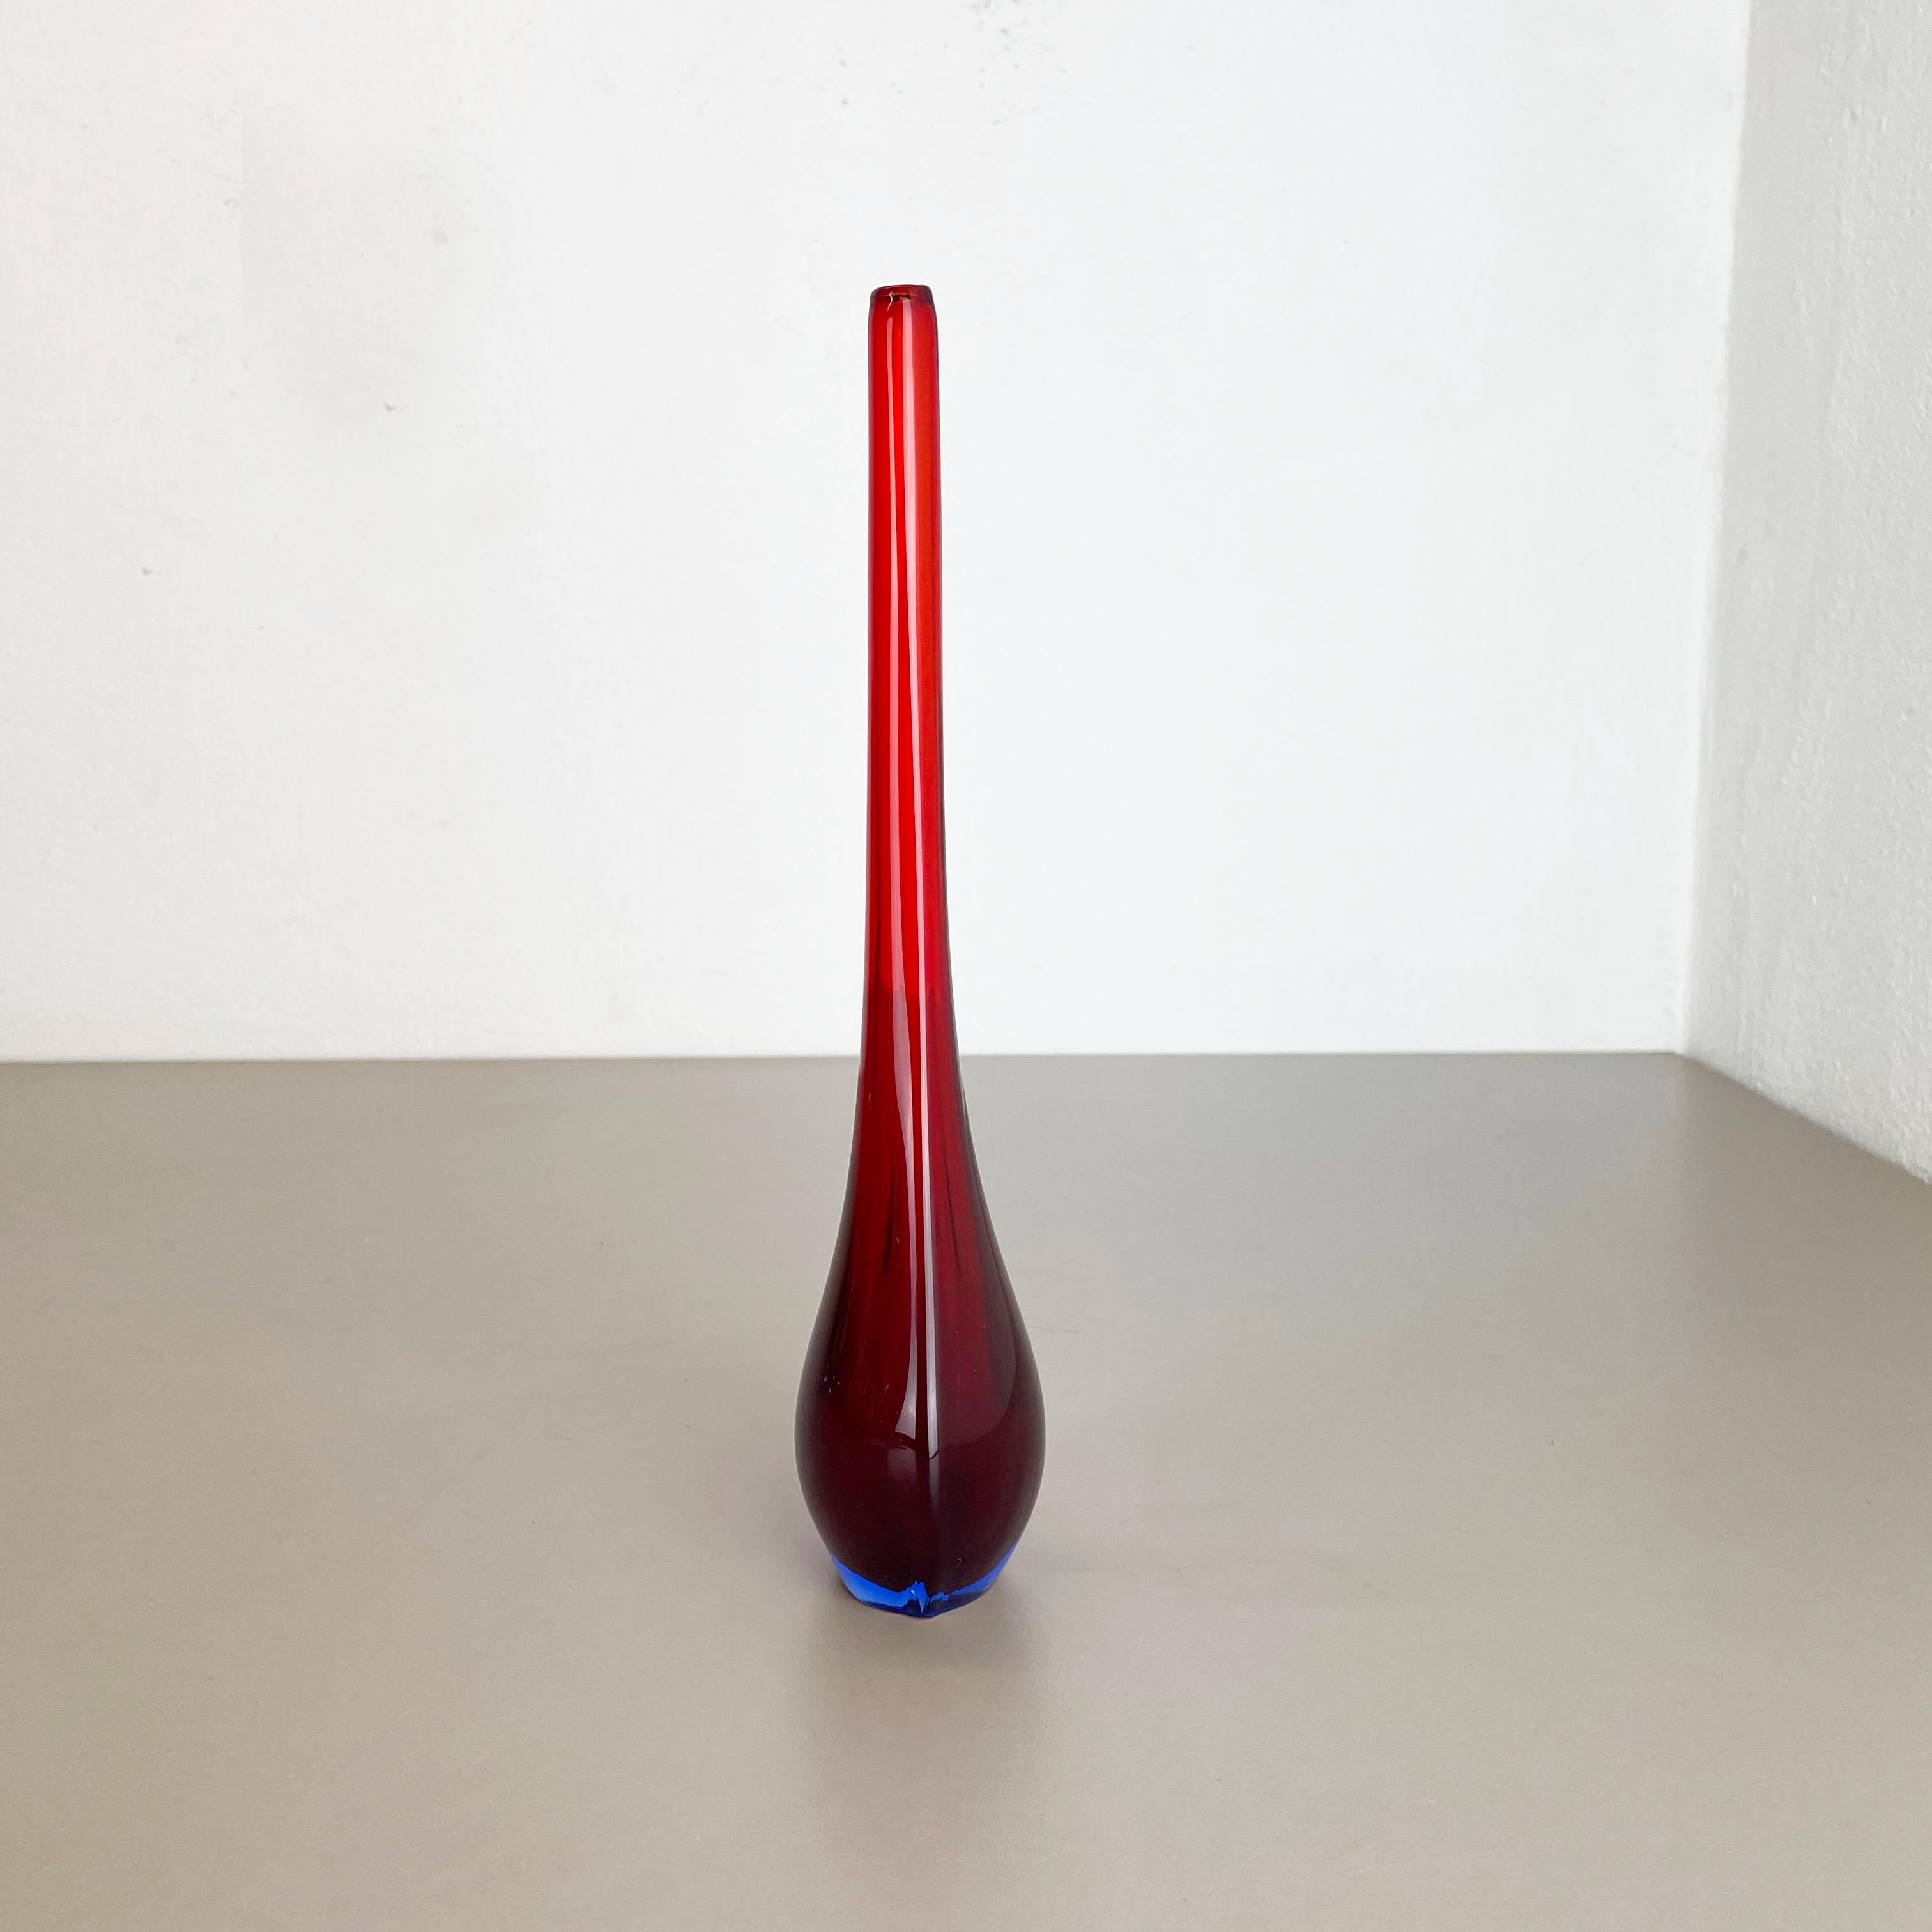 German Large 1960s Murano Glass Sommerso 29cm Single-Stem Vase by Flavio Poli, Italy For Sale